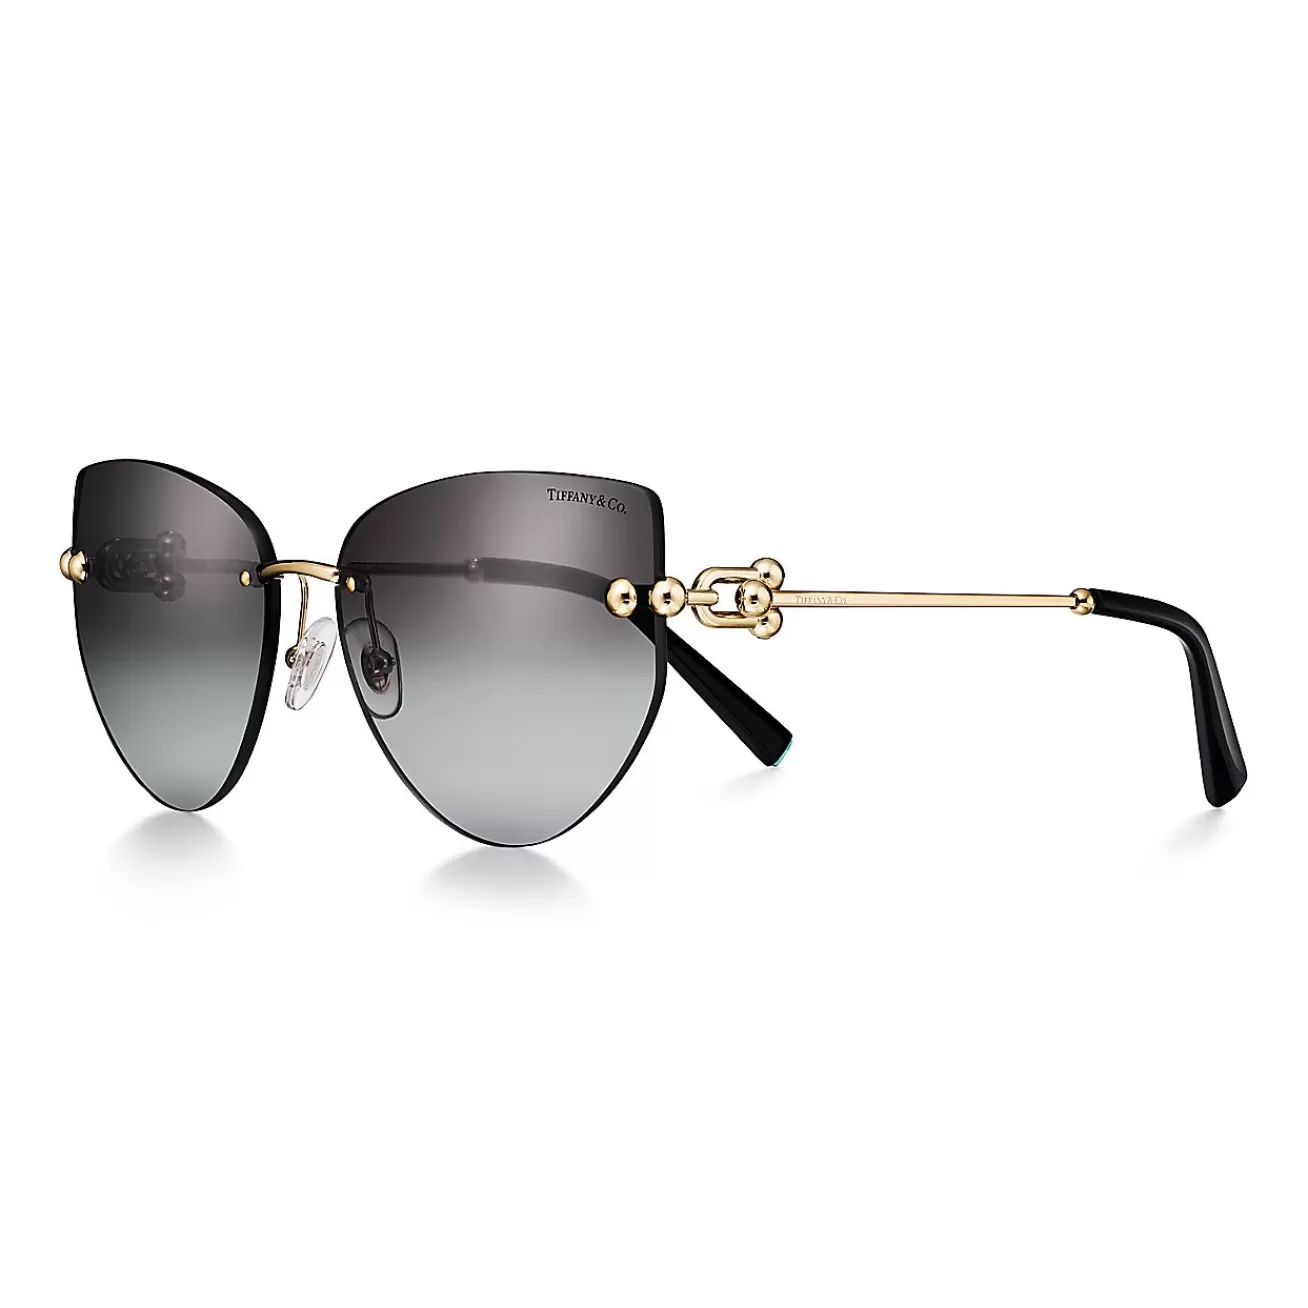 Tiffany & Co. Tiffany HardWear Sunglasses in Pale Gold-colored Metal with Gray Gradient Lenses | ^Women Tiffany HardWear | Sunglasses